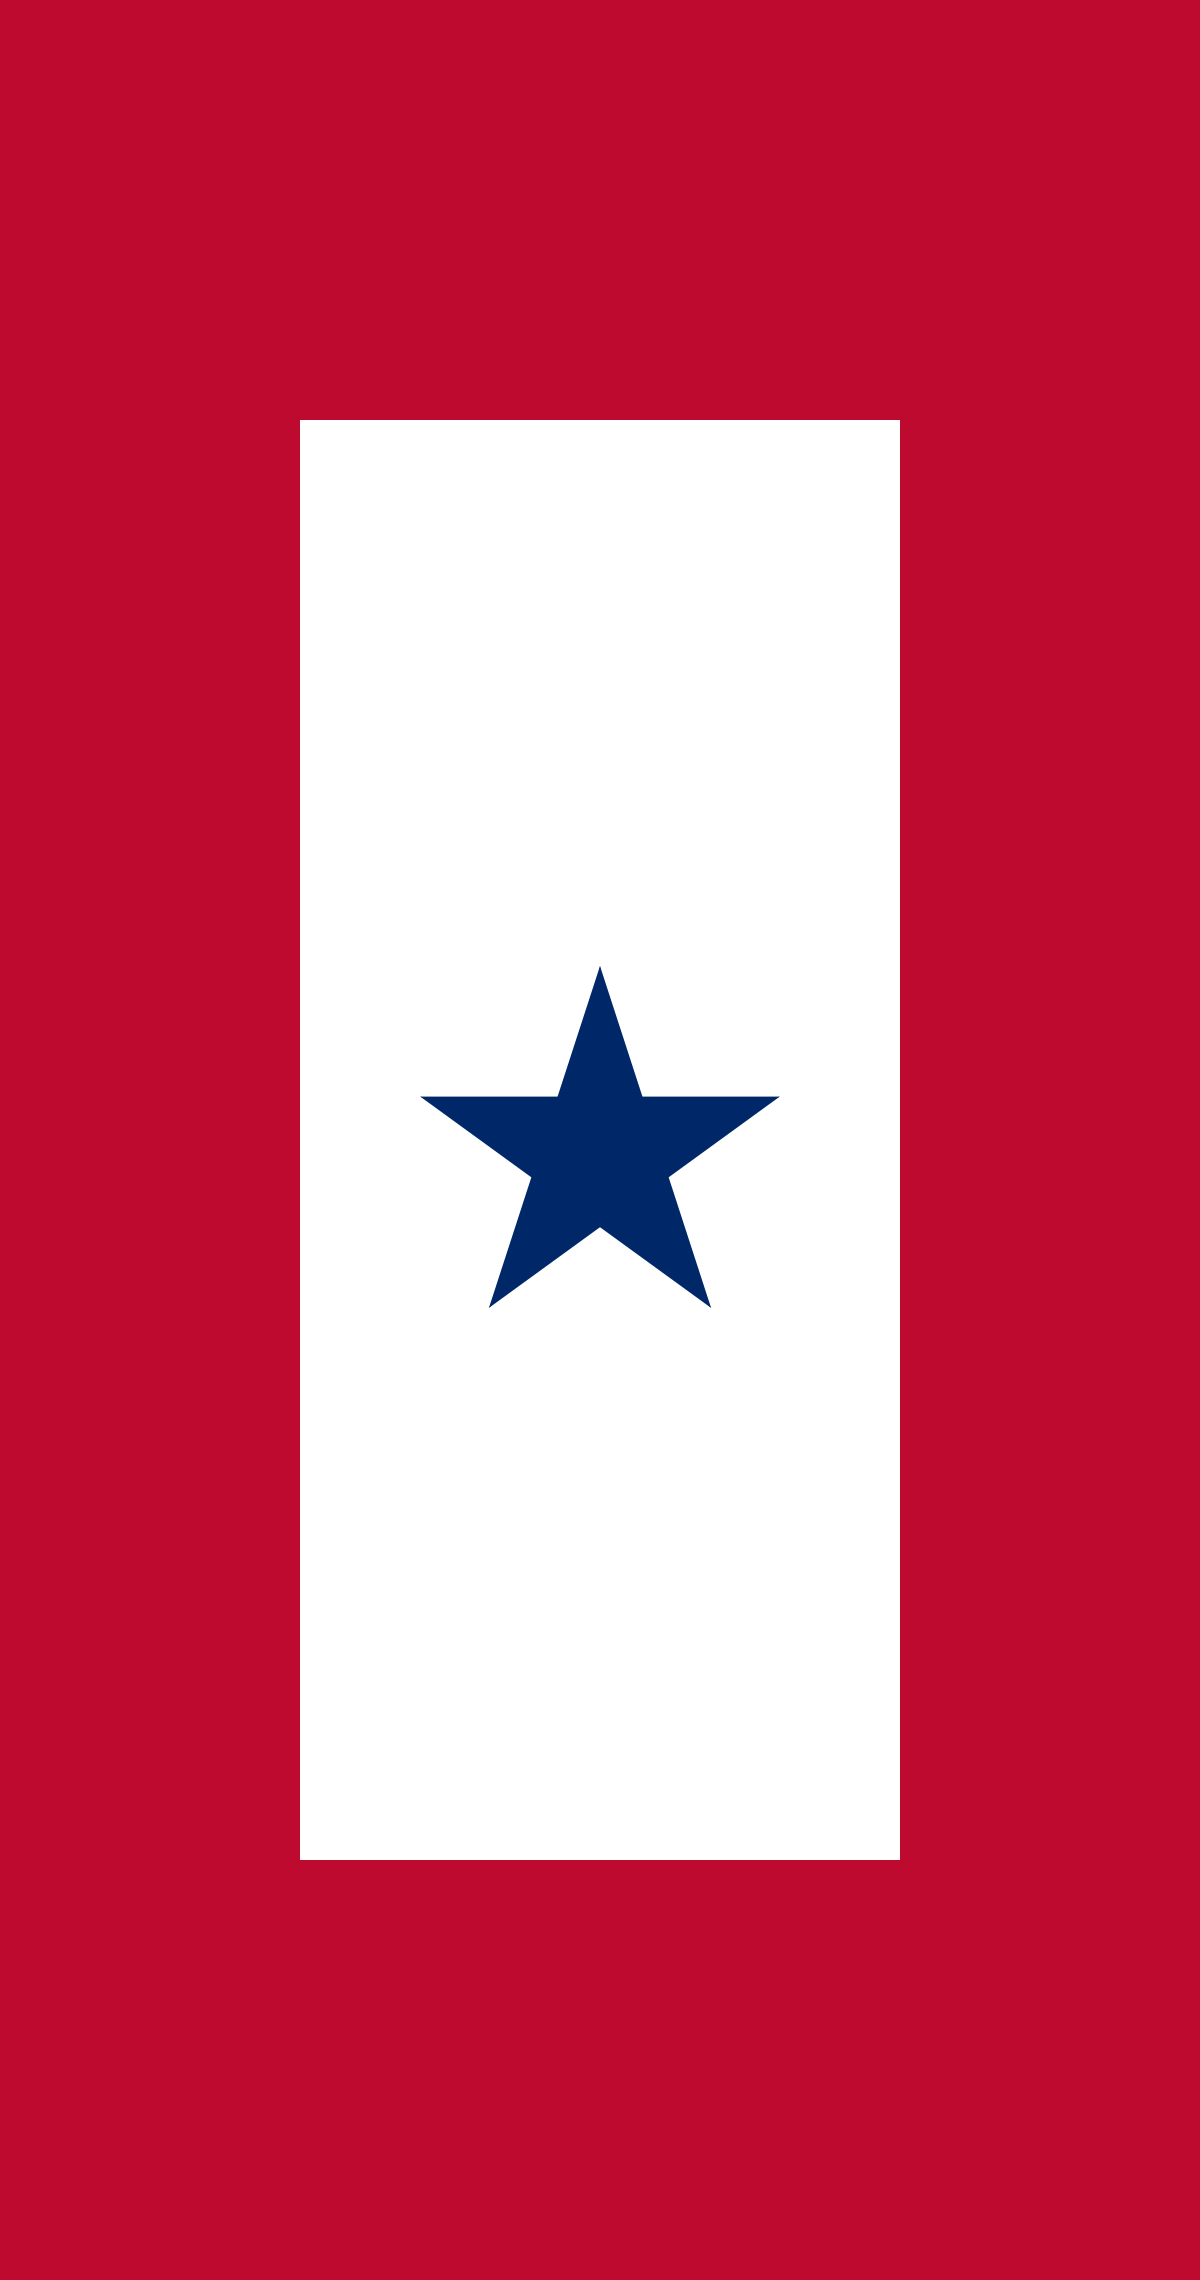 Red and Blue Star Logo - Service flag